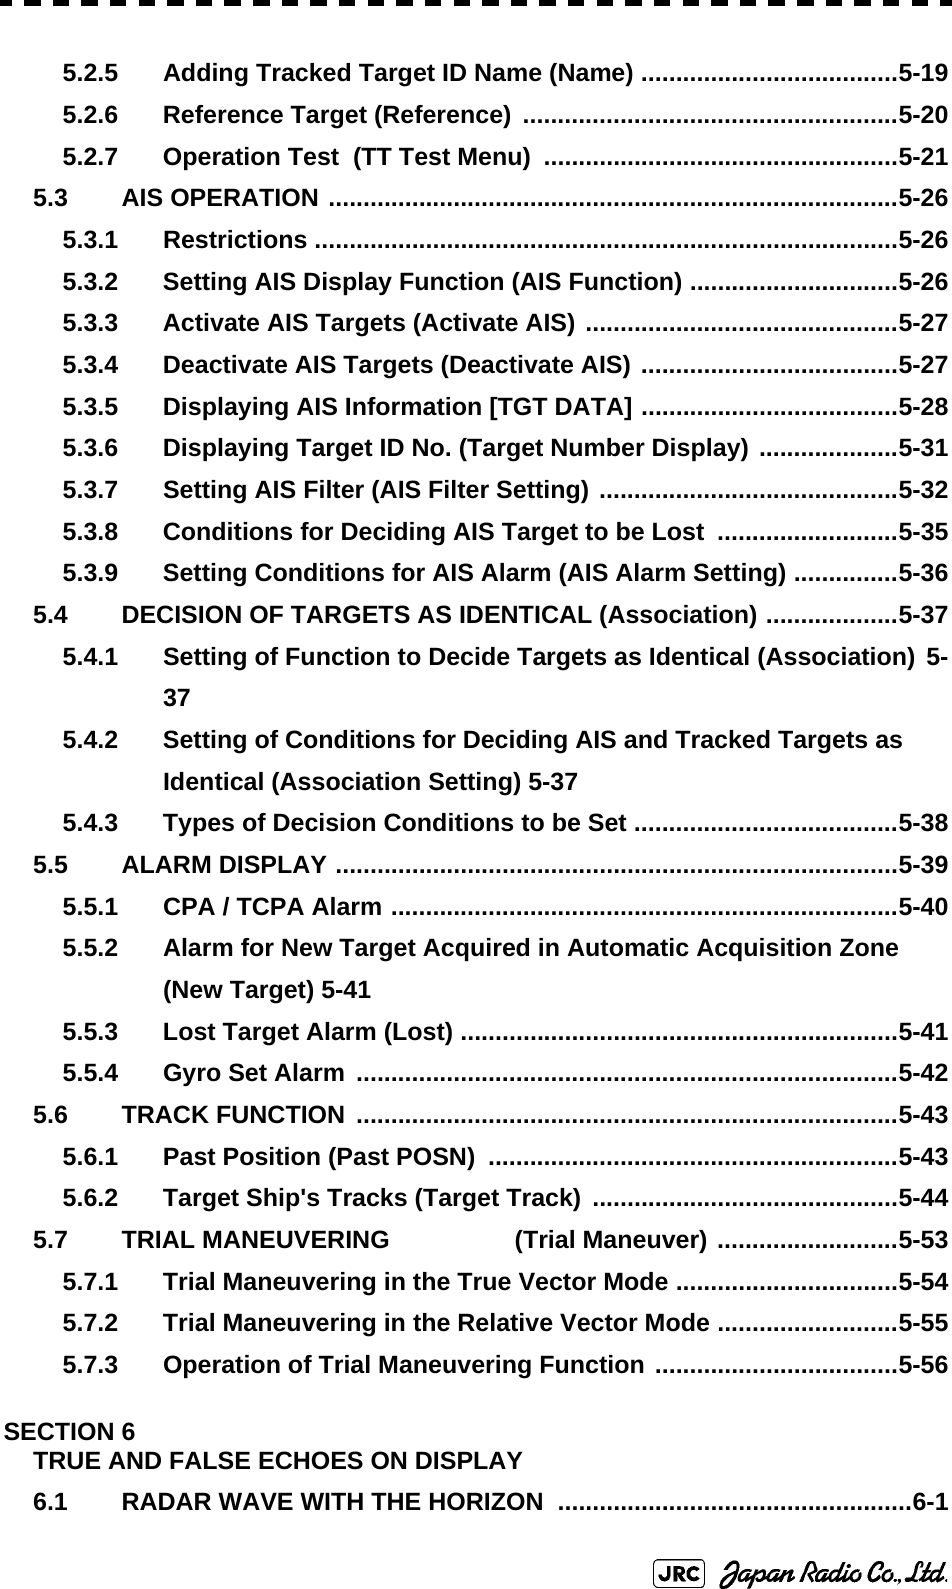 5.2.5 Adding Tracked Target ID Name (Name) .....................................5-195.2.6 Reference Target (Reference) ......................................................5-205.2.7 Operation Test  (TT Test Menu)  ...................................................5-215.3 AIS OPERATION ..................................................................................5-265.3.1 Restrictions ....................................................................................5-265.3.2 Setting AIS Display Function (AIS Function) ..............................5-265.3.3 Activate AIS Targets (Activate AIS) .............................................5-275.3.4 Deactivate AIS Targets (Deactivate AIS) .....................................5-275.3.5 Displaying AIS Information [TGT DATA] .....................................5-285.3.6 Displaying Target ID No. (Target Number Display) ....................5-315.3.7 Setting AIS Filter (AIS Filter Setting) ...........................................5-325.3.8 Conditions for Deciding AIS Target to be Lost  ..........................5-355.3.9 Setting Conditions for AIS Alarm (AIS Alarm Setting) ...............5-365.4 DECISION OF TARGETS AS IDENTICAL (Association) ...................5-375.4.1 Setting of Function to Decide Targets as Identical (Association) 5-375.4.2 Setting of Conditions for Deciding AIS and Tracked Targets as Identical (Association Setting) 5-375.4.3 Types of Decision Conditions to be Set ......................................5-385.5 ALARM DISPLAY .................................................................................5-395.5.1 CPA / TCPA Alarm .........................................................................5-405.5.2 Alarm for New Target Acquired in Automatic Acquisition Zone (New Target) 5-415.5.3 Lost Target Alarm (Lost) ...............................................................5-415.5.4 Gyro Set Alarm ..............................................................................5-425.6 TRACK FUNCTION ..............................................................................5-435.6.1 Past Position (Past POSN)  ...........................................................5-435.6.2 Target Ship&apos;s Tracks (Target Track) ............................................5-445.7 TRIAL MANEUVERING                  (Trial Maneuver) ..........................5-535.7.1 Trial Maneuvering in the True Vector Mode ................................5-545.7.2 Trial Maneuvering in the Relative Vector Mode ..........................5-555.7.3 Operation of Trial Maneuvering Function ...................................5-56SECTION 6TRUE AND FALSE ECHOES ON DISPLAY6.1 RADAR WAVE WITH THE HORIZON ...................................................6-1